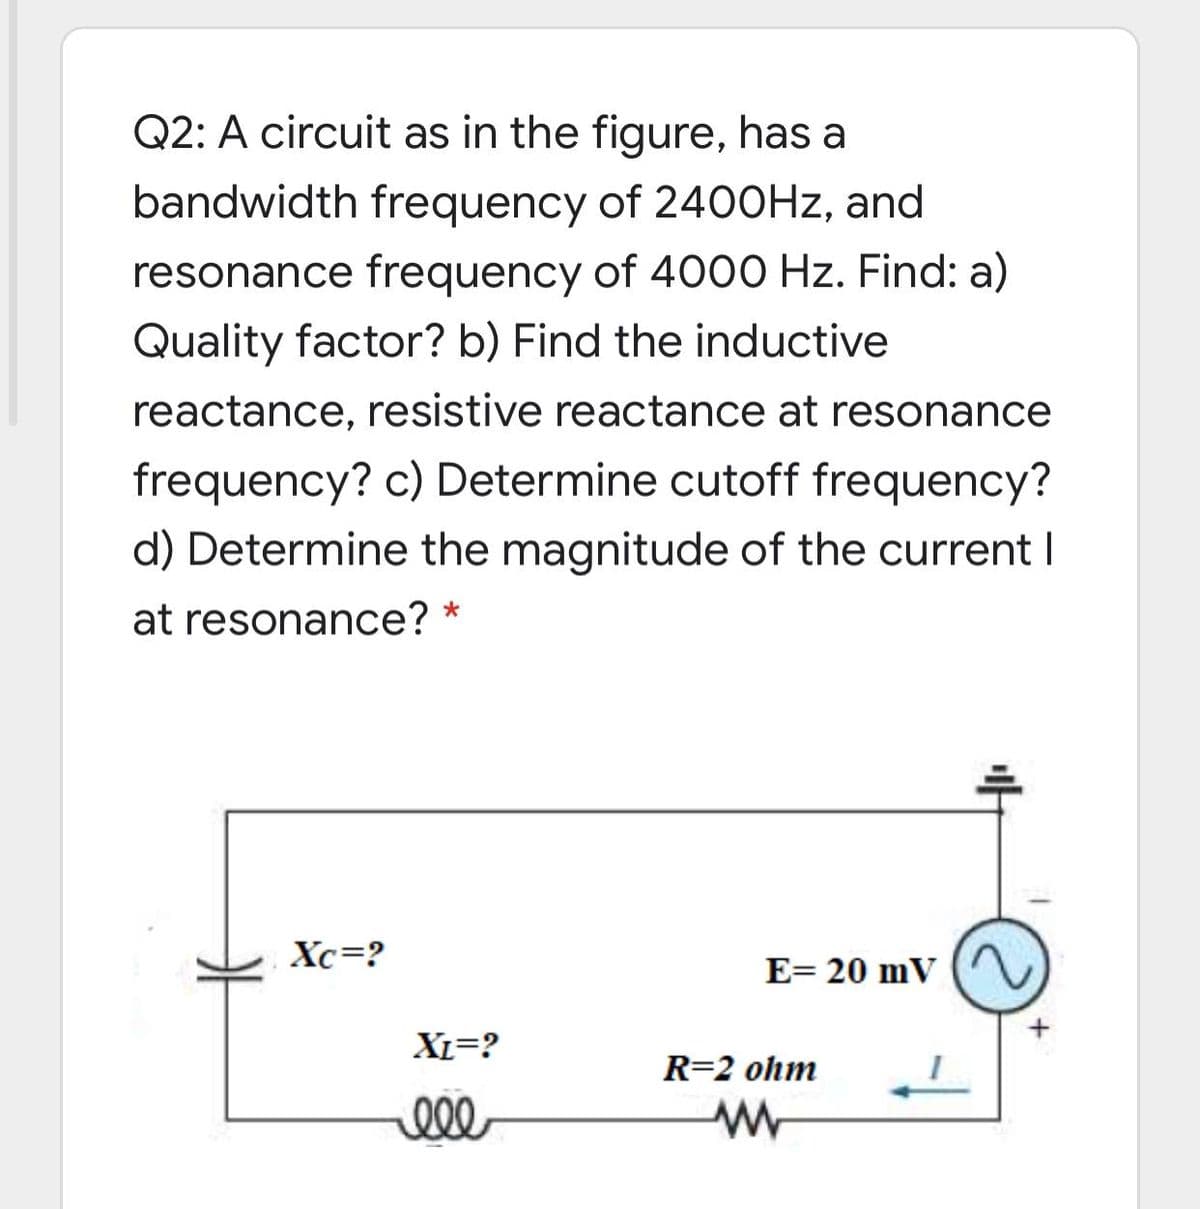 Q2: A circuit as in the figure, has a
bandwidth frequency of 240OHZ, and
resonance frequency of 4000 Hz. Find: a)
Quality factor? b) Find the inductive
reactance, resistive reactance at resonance
frequency? c) Determine cutoff frequency?
d) Determine the magnitude of the current I
at resonance?
Xc=?
E= 20 mV
XL=?
R=2 ohm
ll
